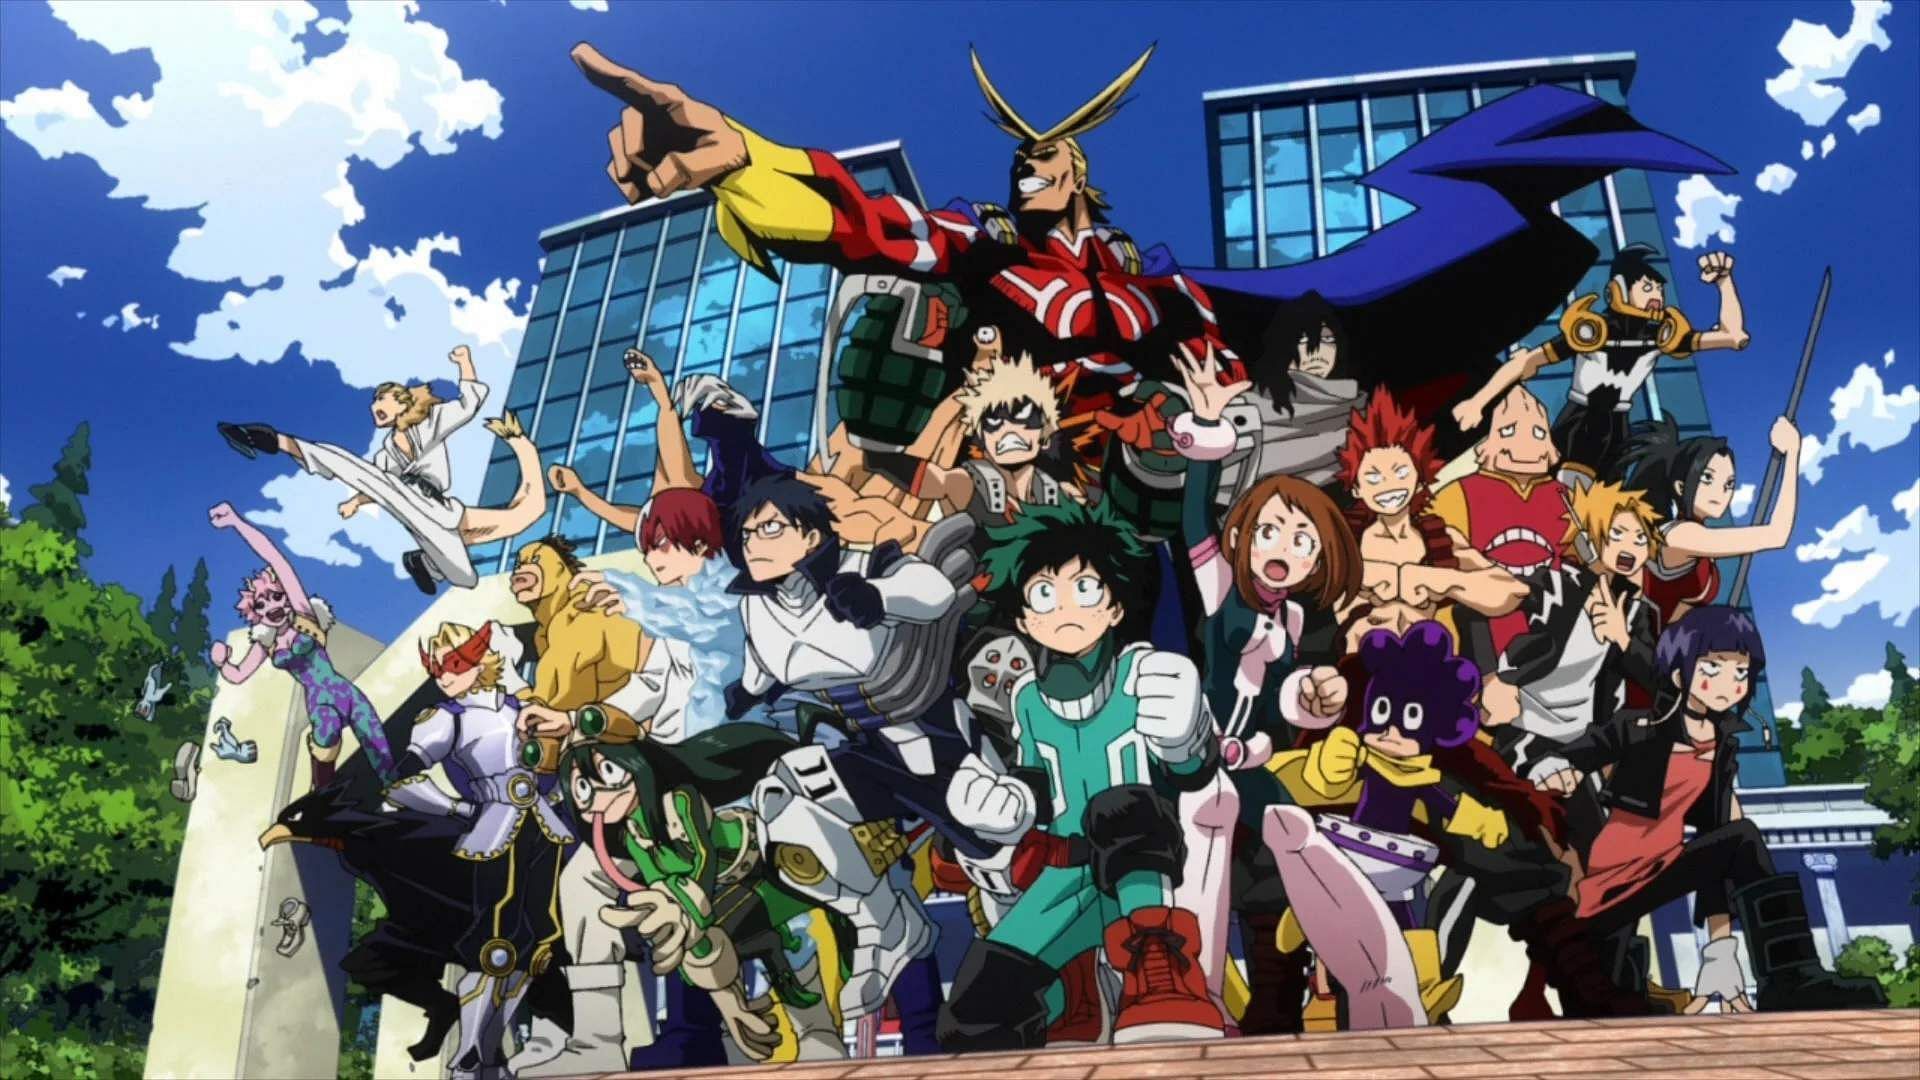 Class 1-A proves instrumental in My Hero Academia Chapter 422&#039;s opening pages (Image via BONES)